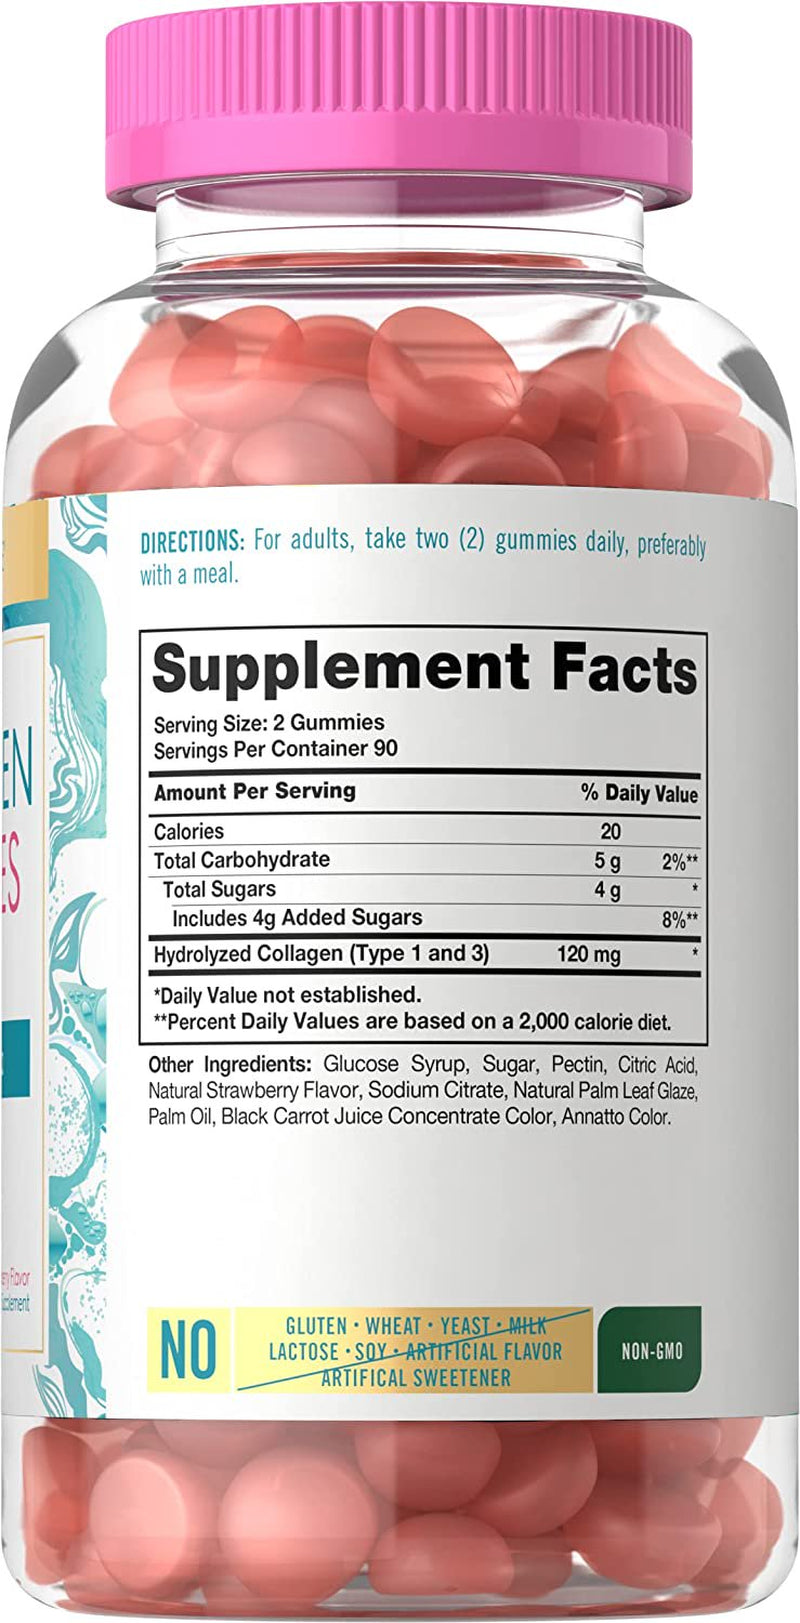 Collagen Gummies | 180 Count | Type 1 & 3 | Strawberry Flavored | by Carlyle